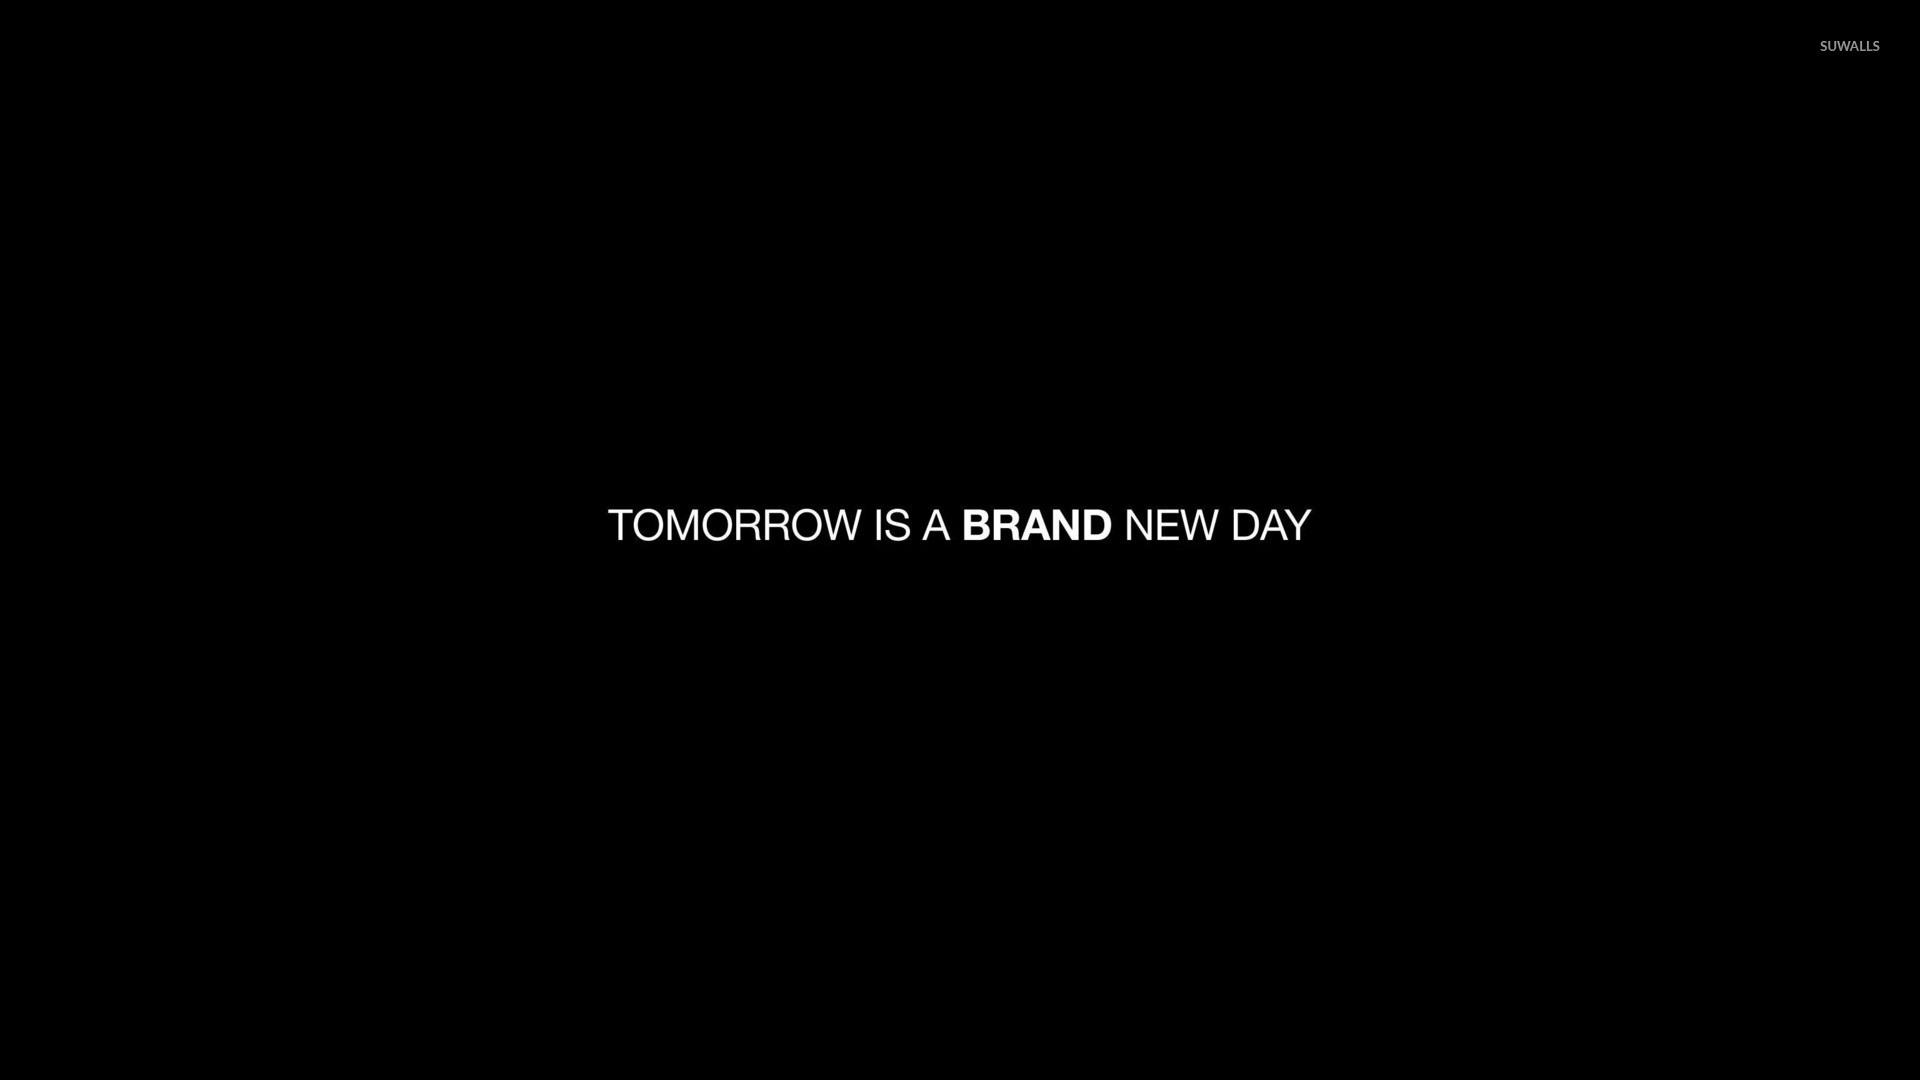 1920x1080 Tomorrow is a brand new day wallpaper